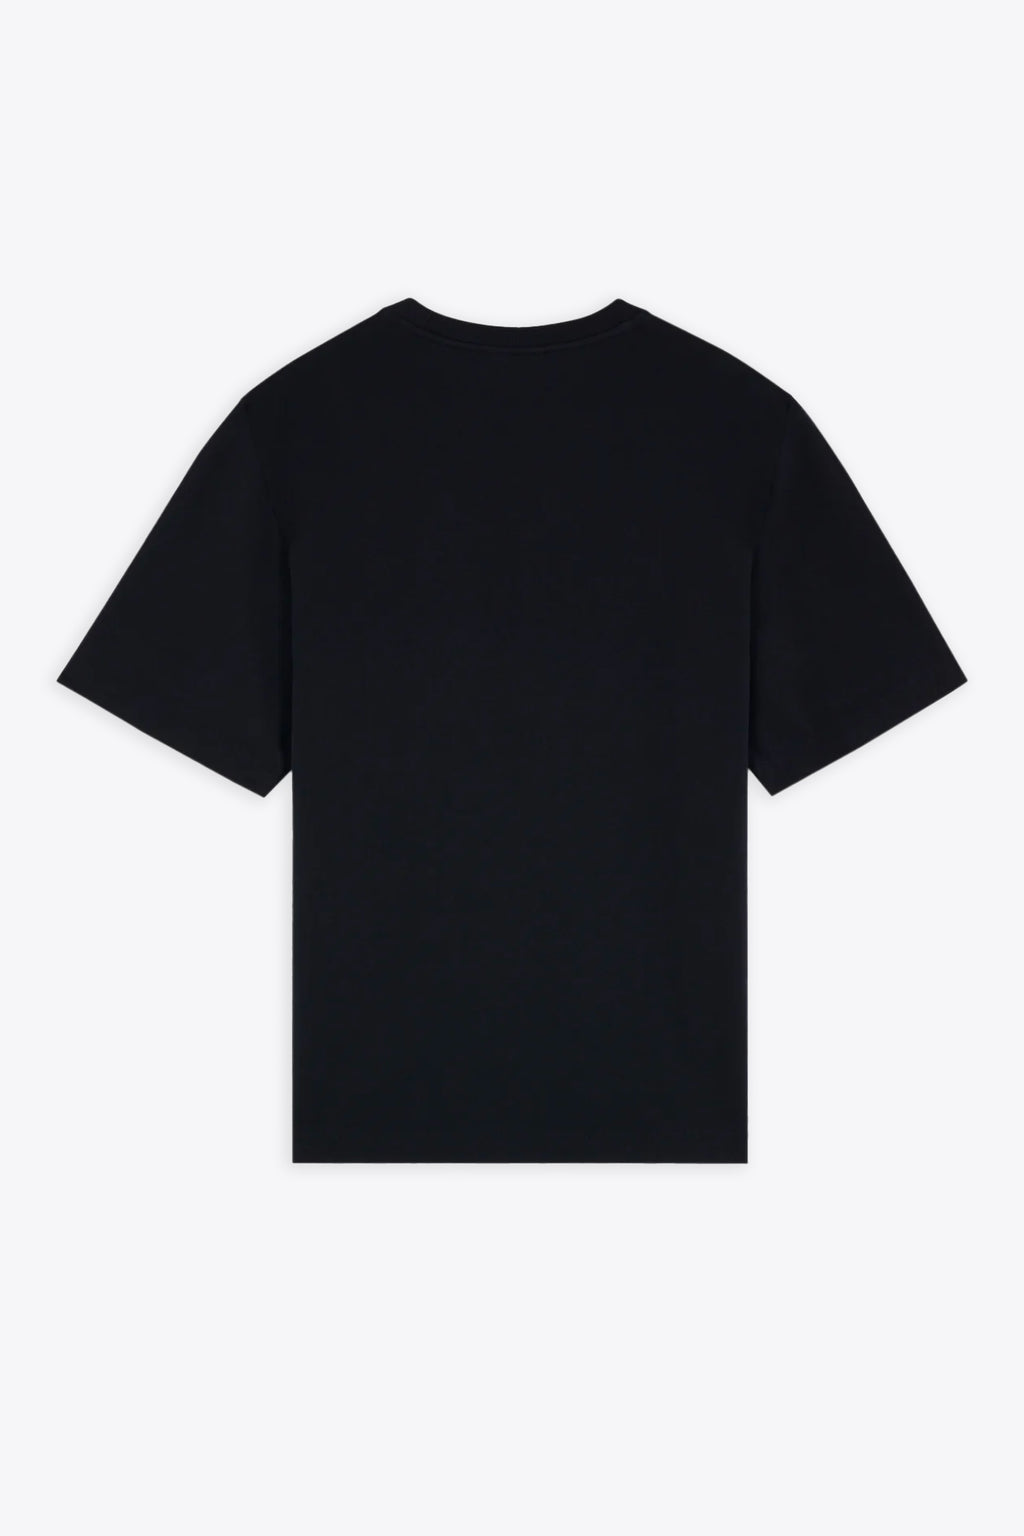 alt-image__Black-cotton-t-shirt-with-tonal-chest-patch---Bold-Fox-Head-Patch-Oversize-Tee-